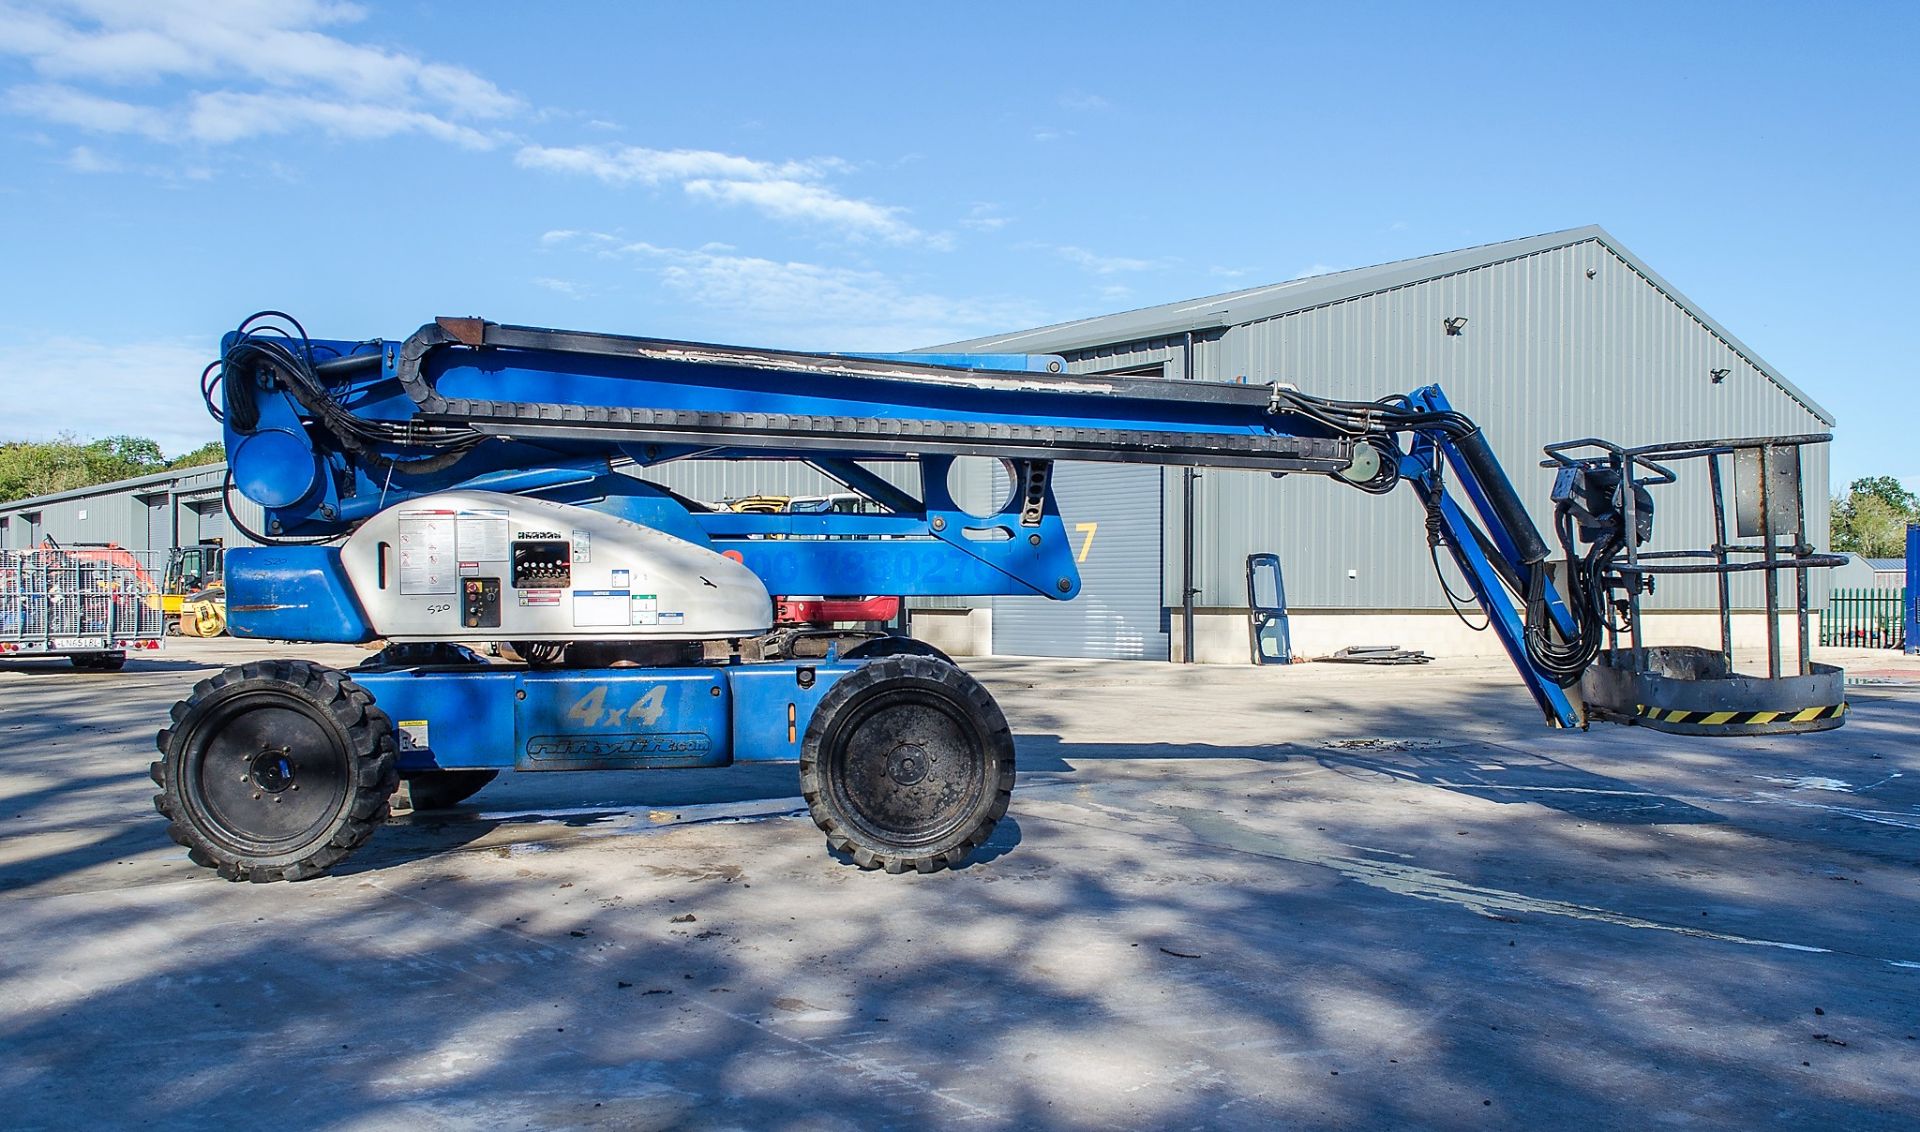 Nifty HR21D diesel driven 4 x 4 articulated boom lift  Year: 2007  S/N: 16141 HYP076 - Image 10 of 15